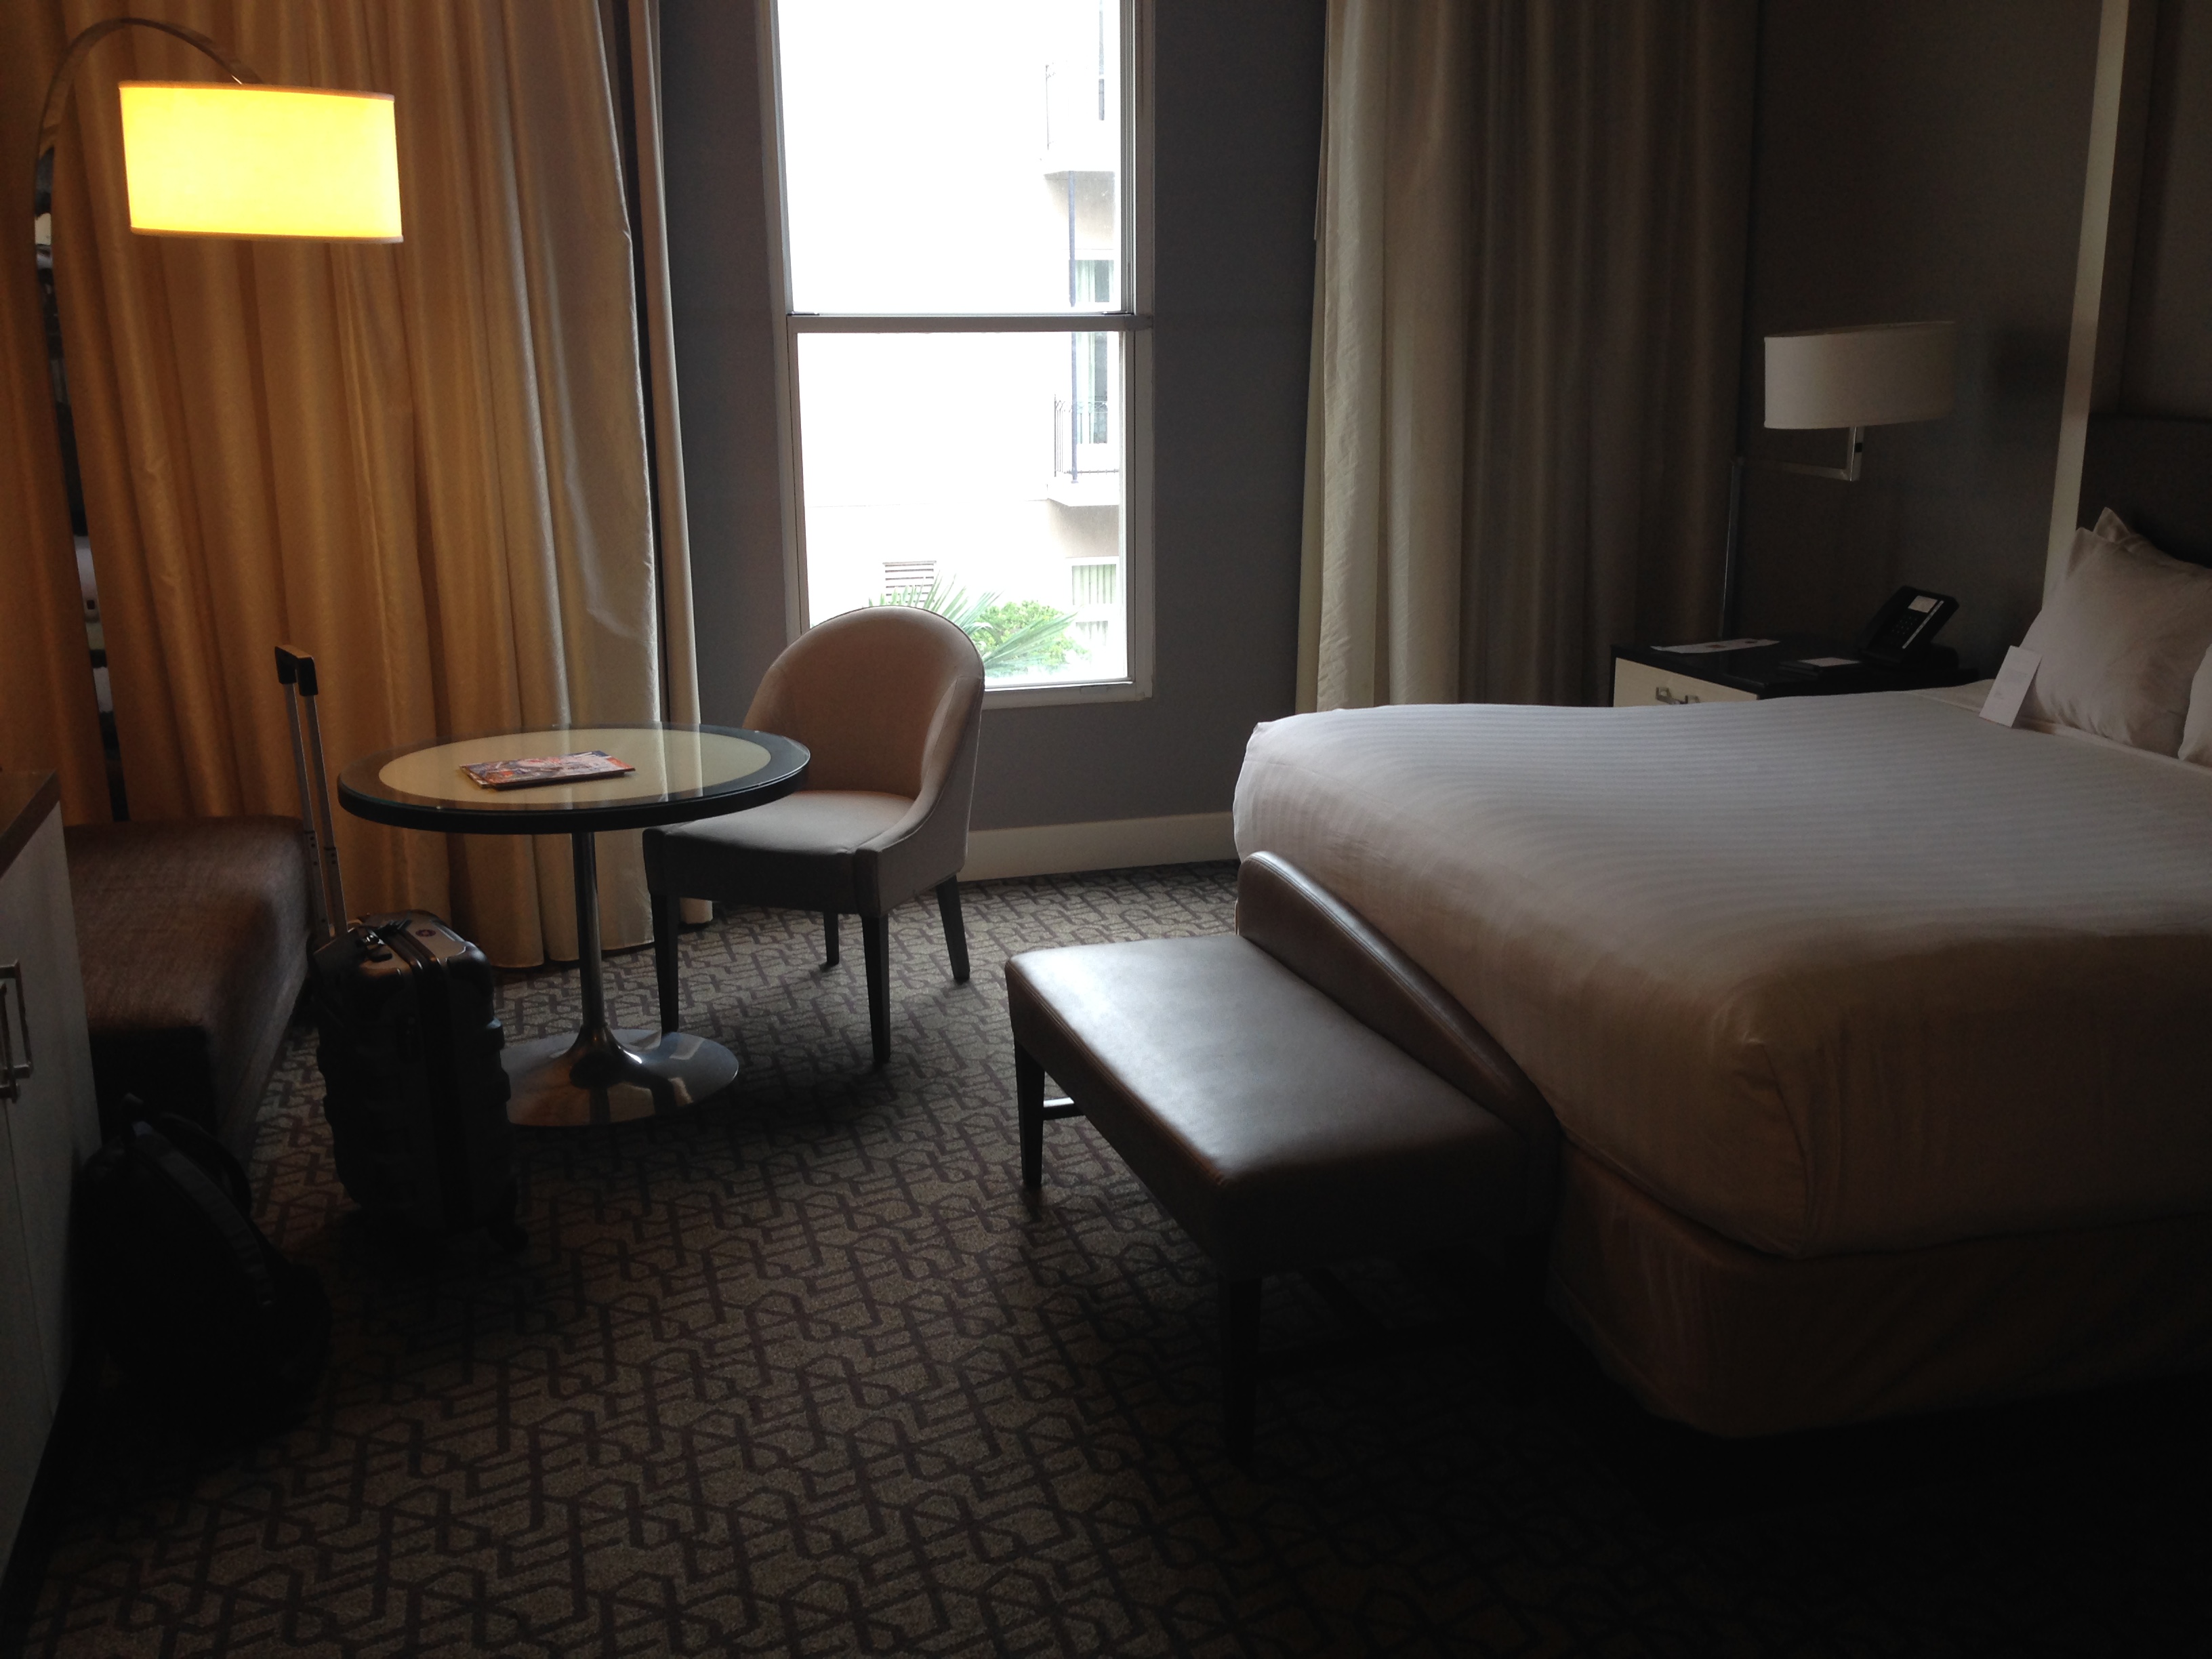 New Orleans is dead cheap with Chase points - getting there and finding a hotel is very easy